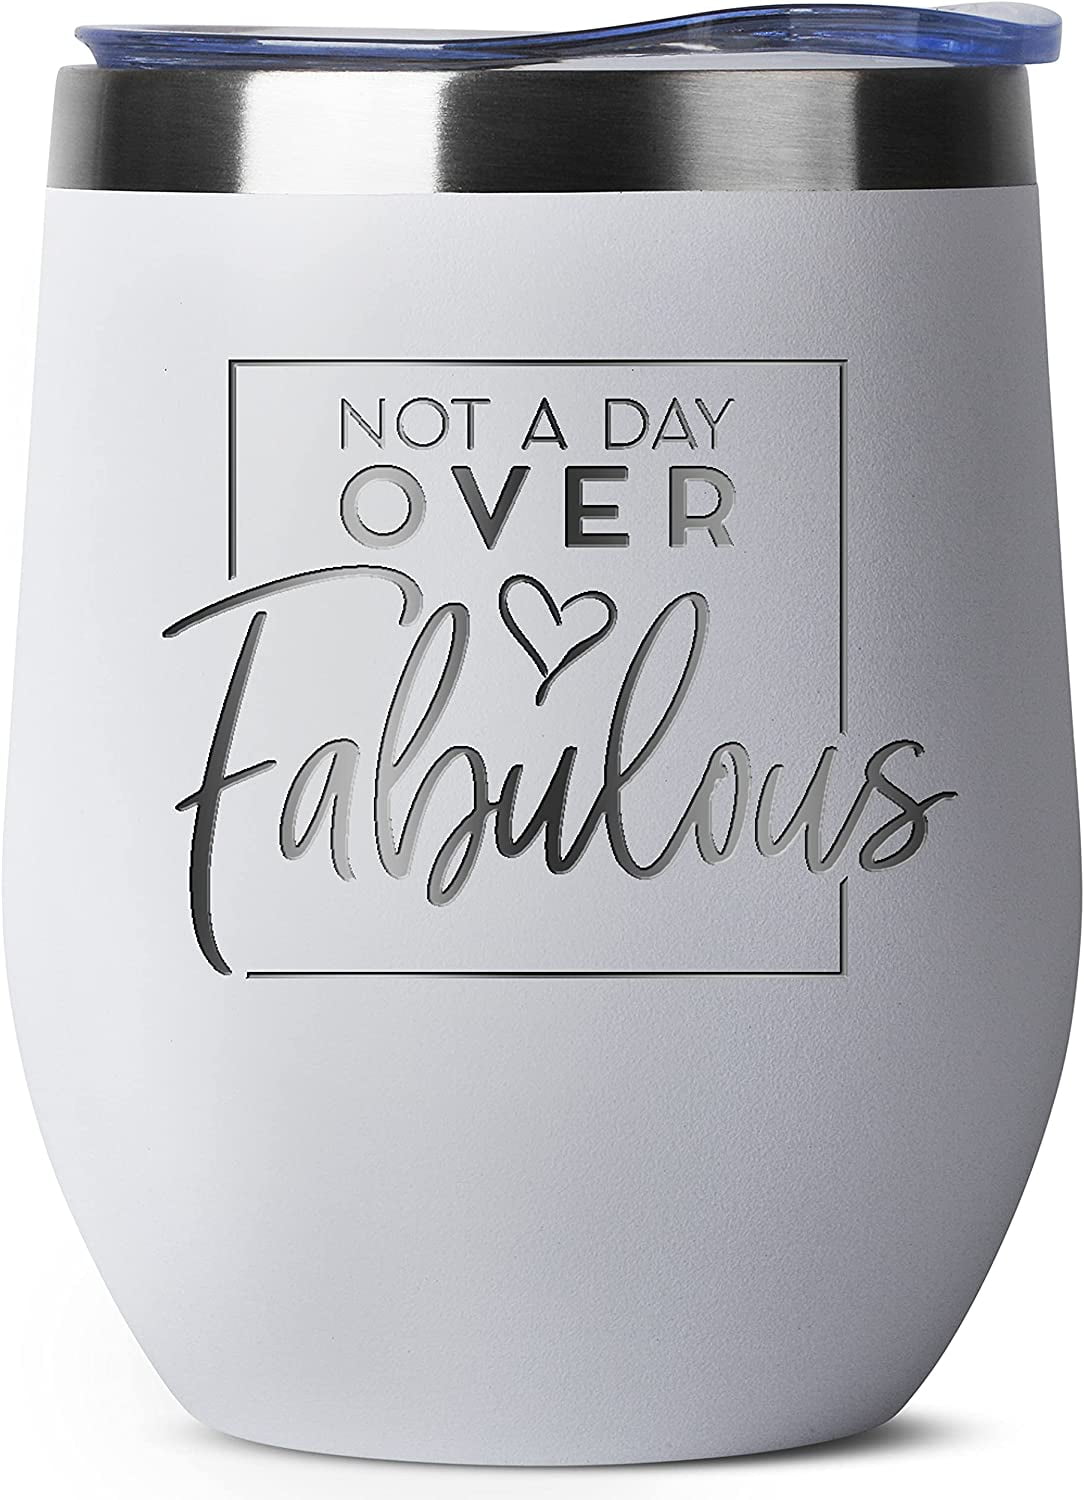 Mom Wife Sister Grandma Girlfriend Best Friend Mother Bday Ideas 12 oz Mint Insulated Stainless Steel Tumbler w Lid Wine Coffee Cups Presents Not A Day Over Fabulous Birthday Gifts for Women